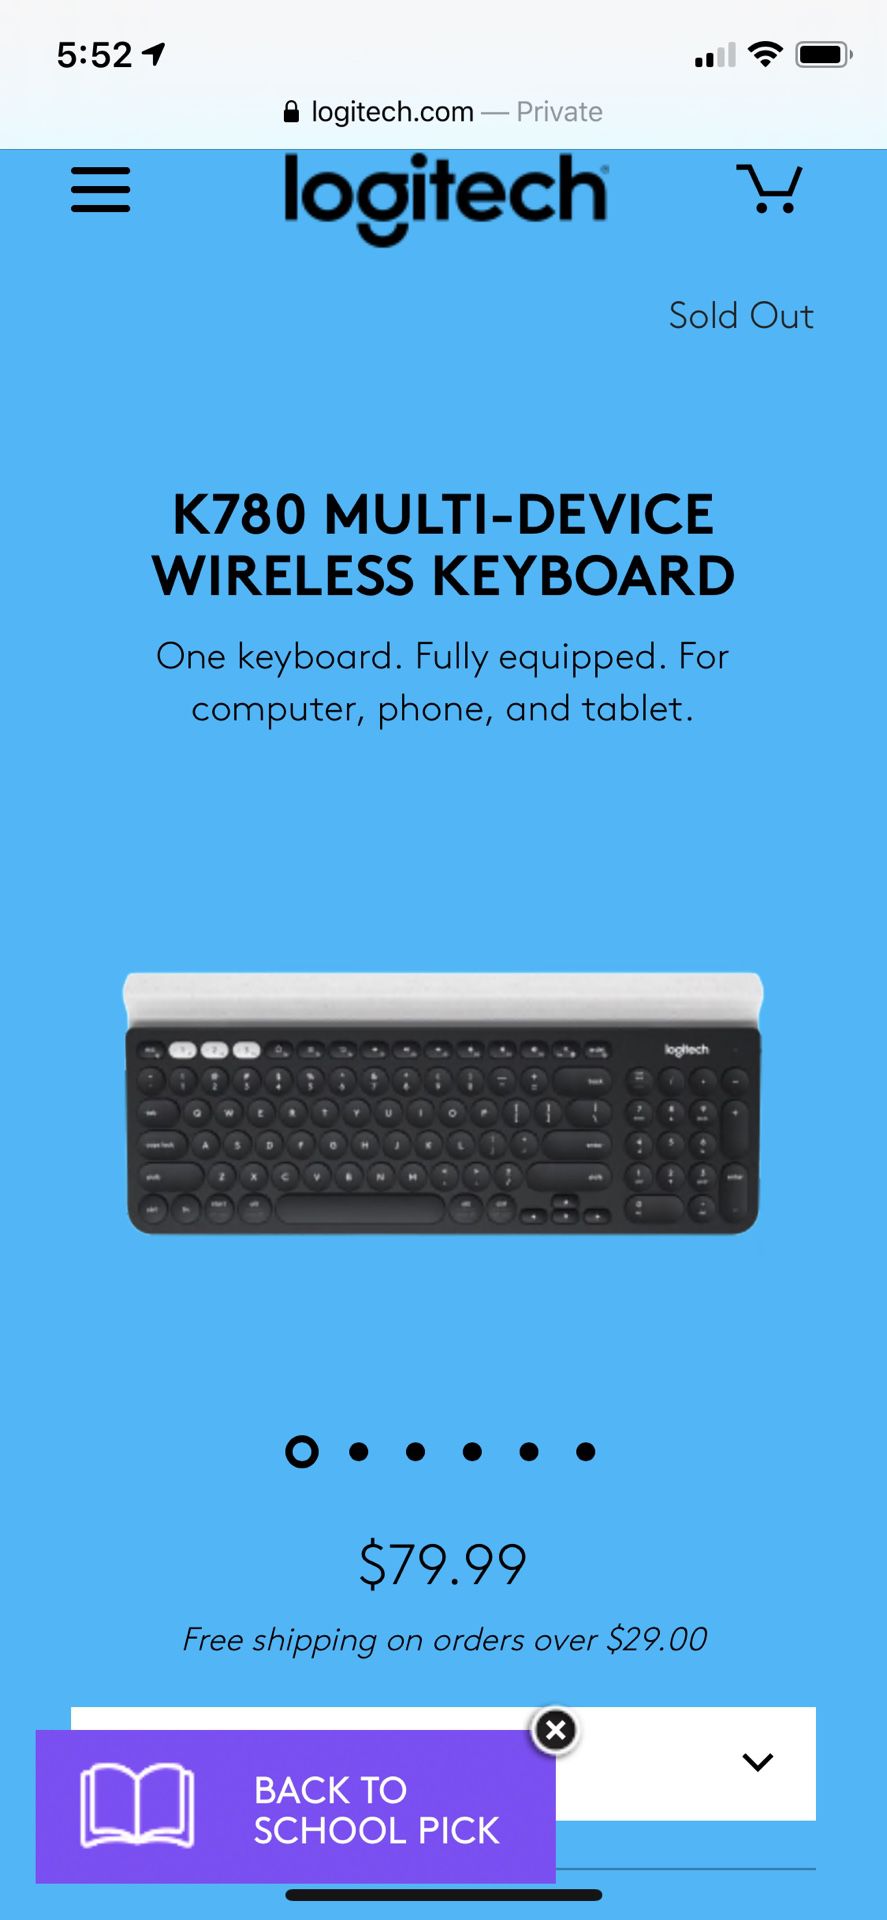 Logitech K780 Multi-Device wireless Bluetooth keyboard for desktop computer, tablets and r electronic devices